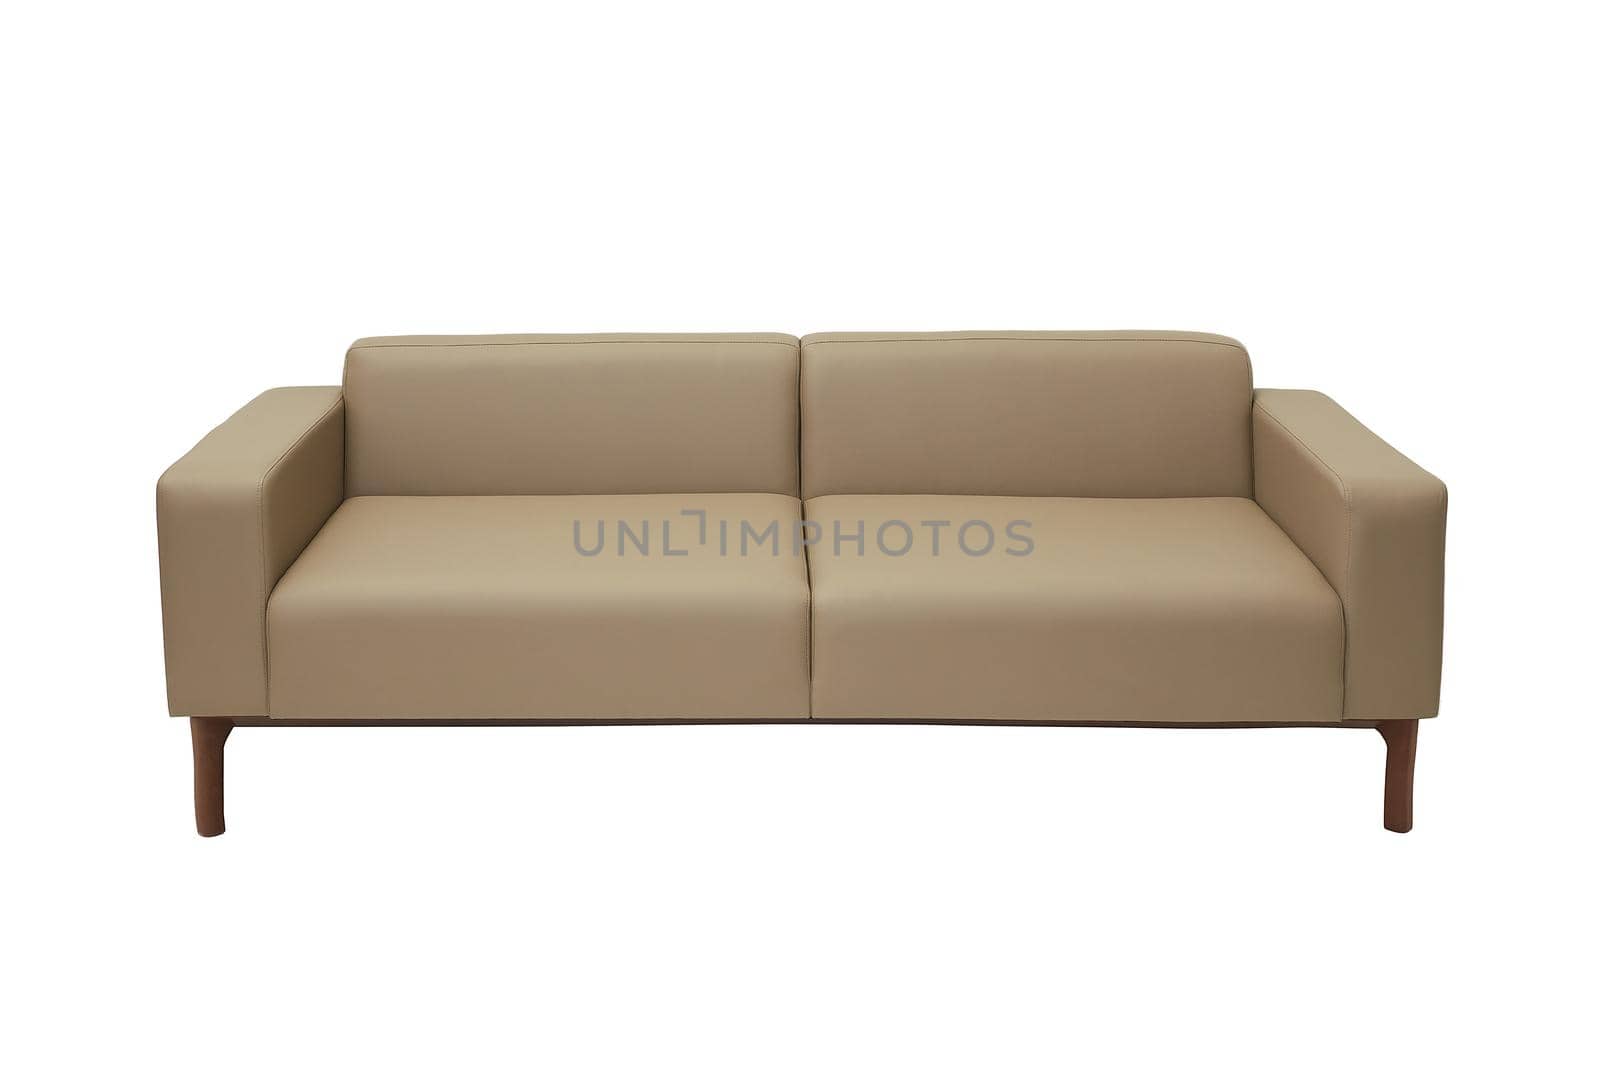 beige leather couch in strict style isolated on white background, front view. modern furniture in minimal style, interior, home or office design